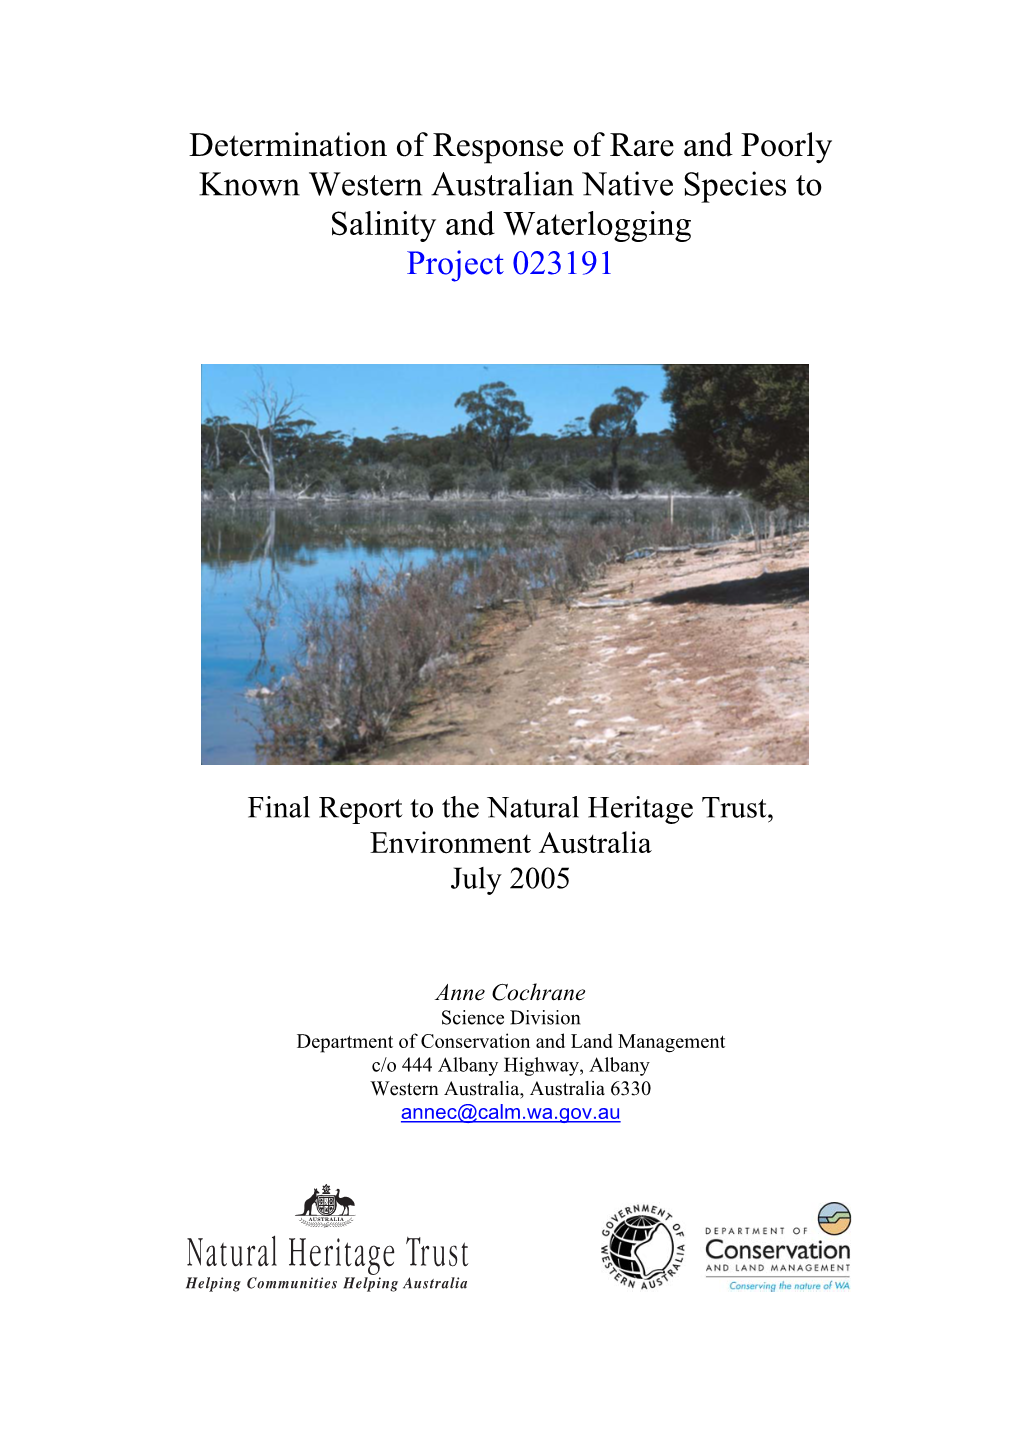 Determination of Response of Rare and Poorly Known Western Australian Native Species to Salinity and Waterlogging Project 023191